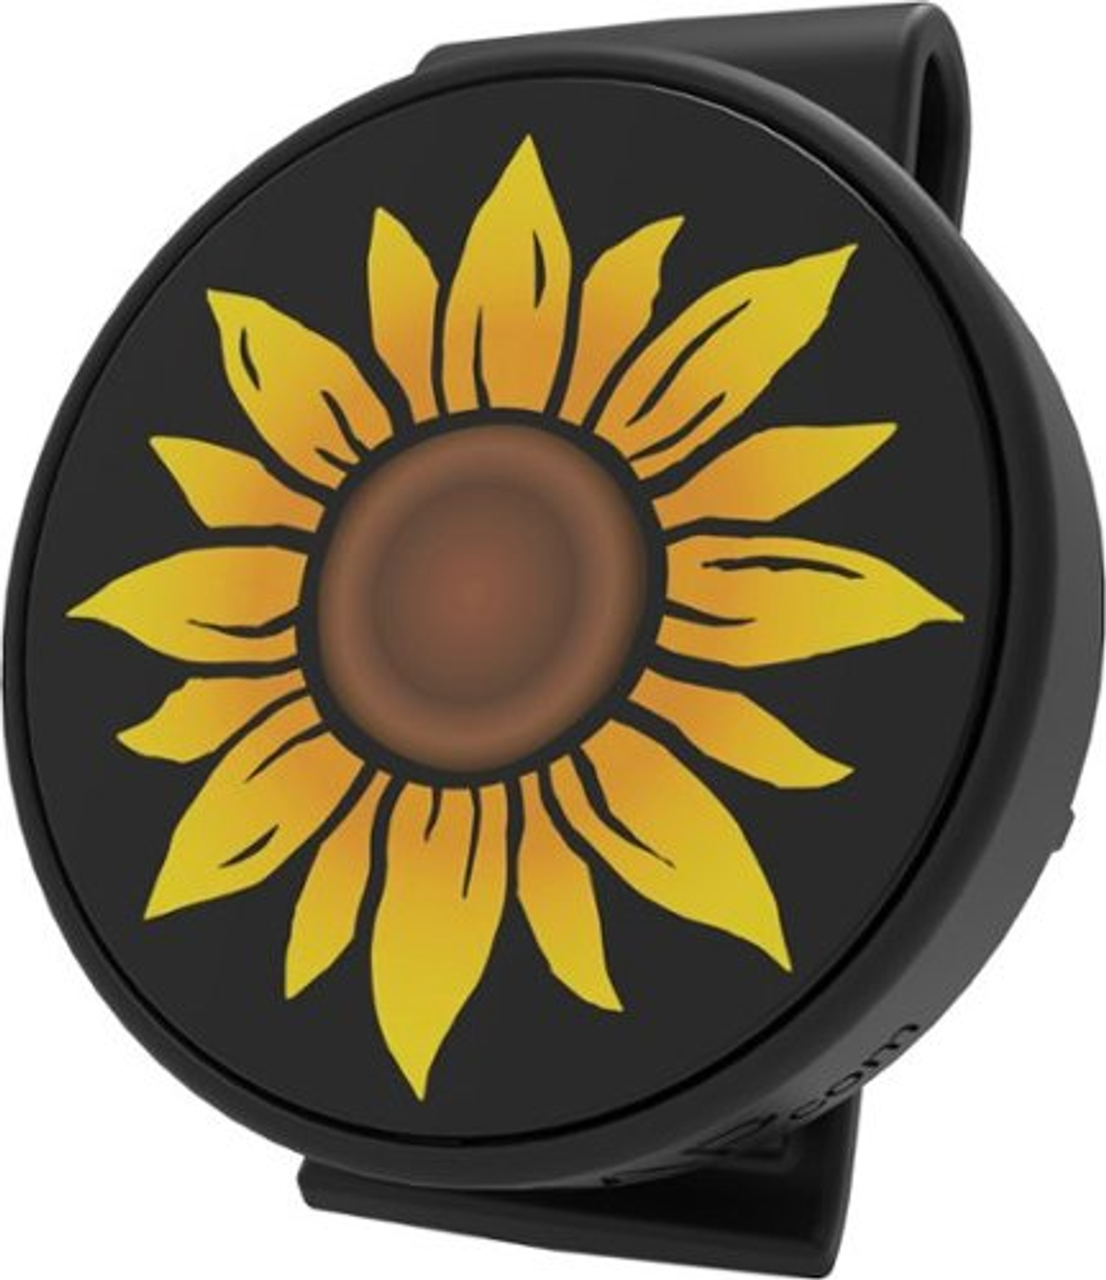 SNAP CLIP - Universal Remote for Mobile Devices - Sunflower Child